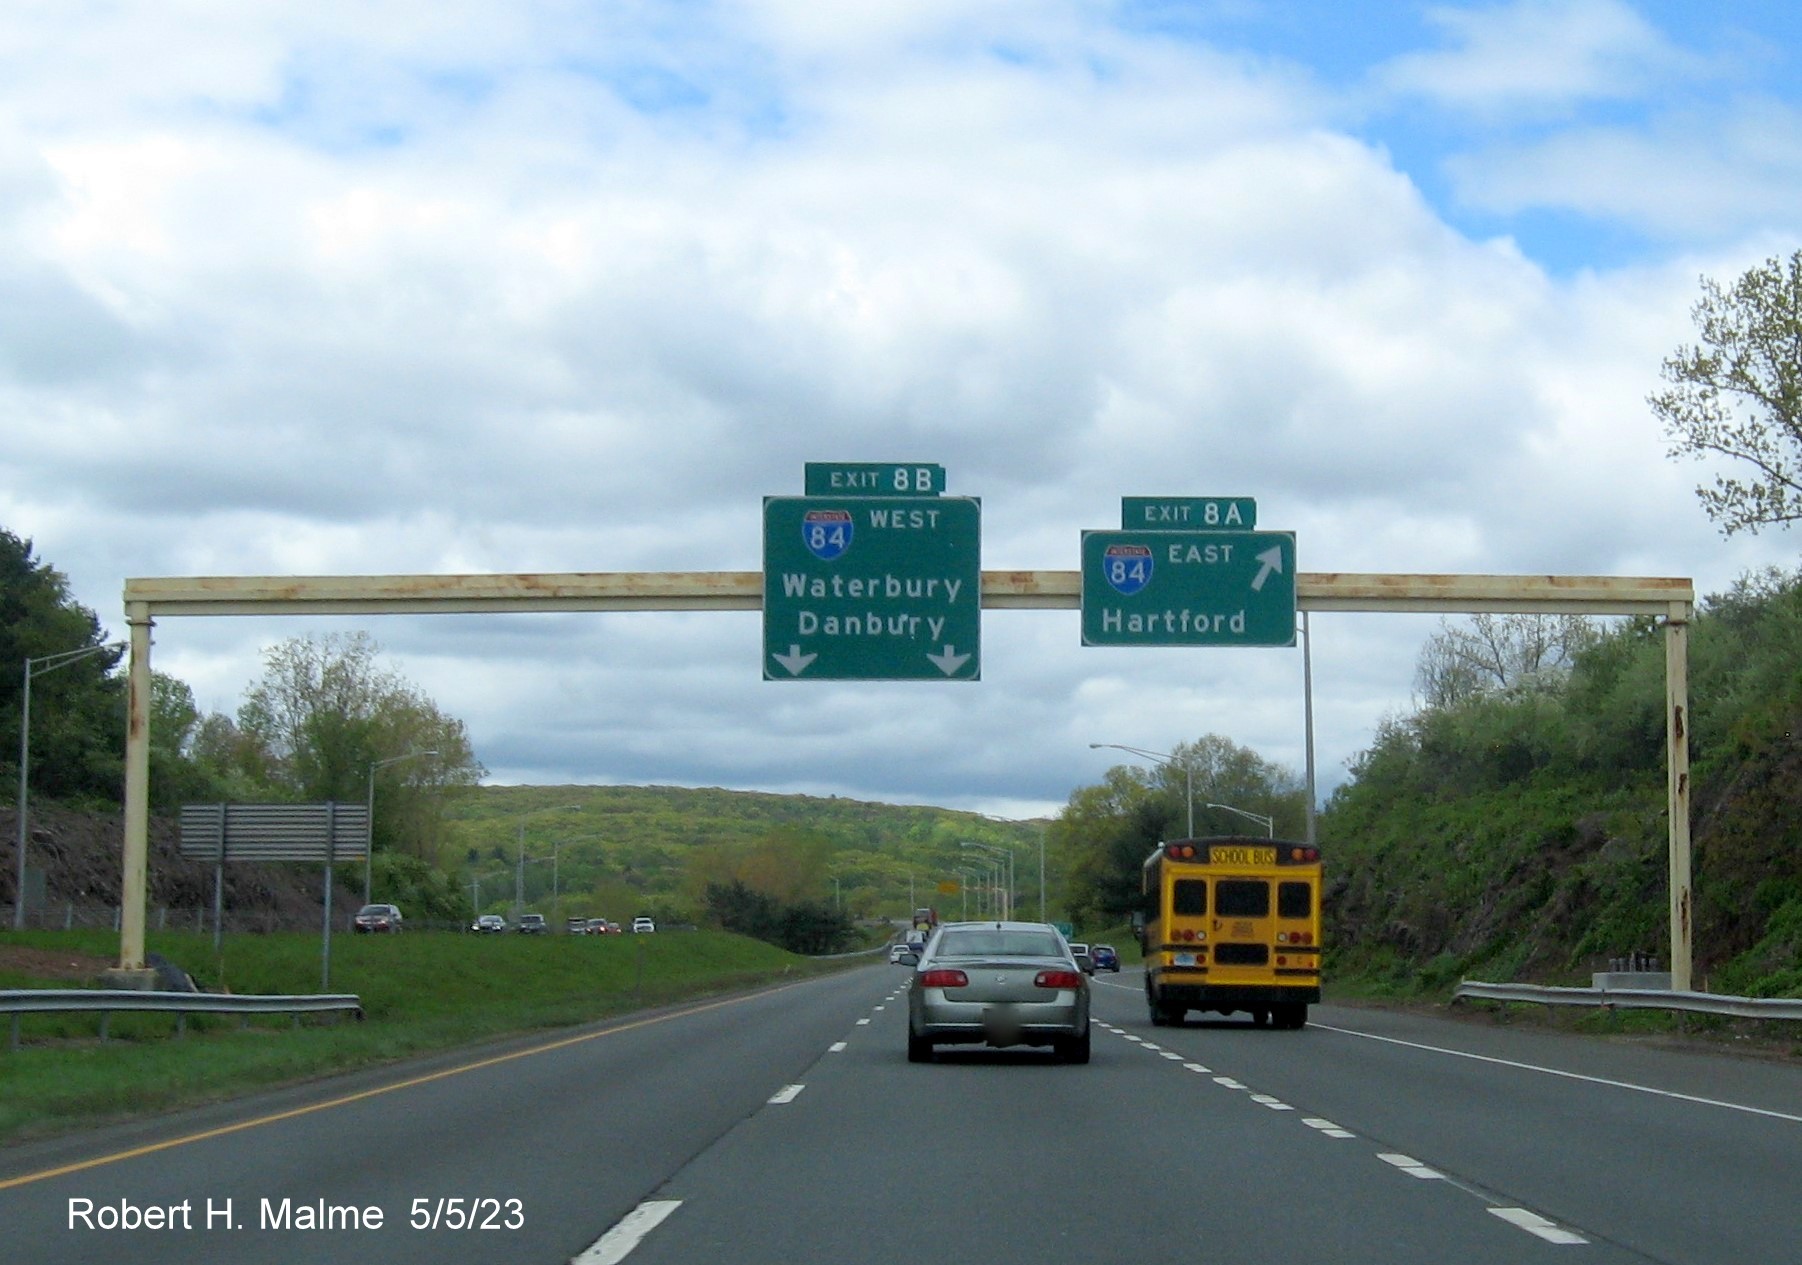 Image of overhead ramp sign for I-84 East exit with new milepost based exit number on I-691 West in Cheshire, May 2023